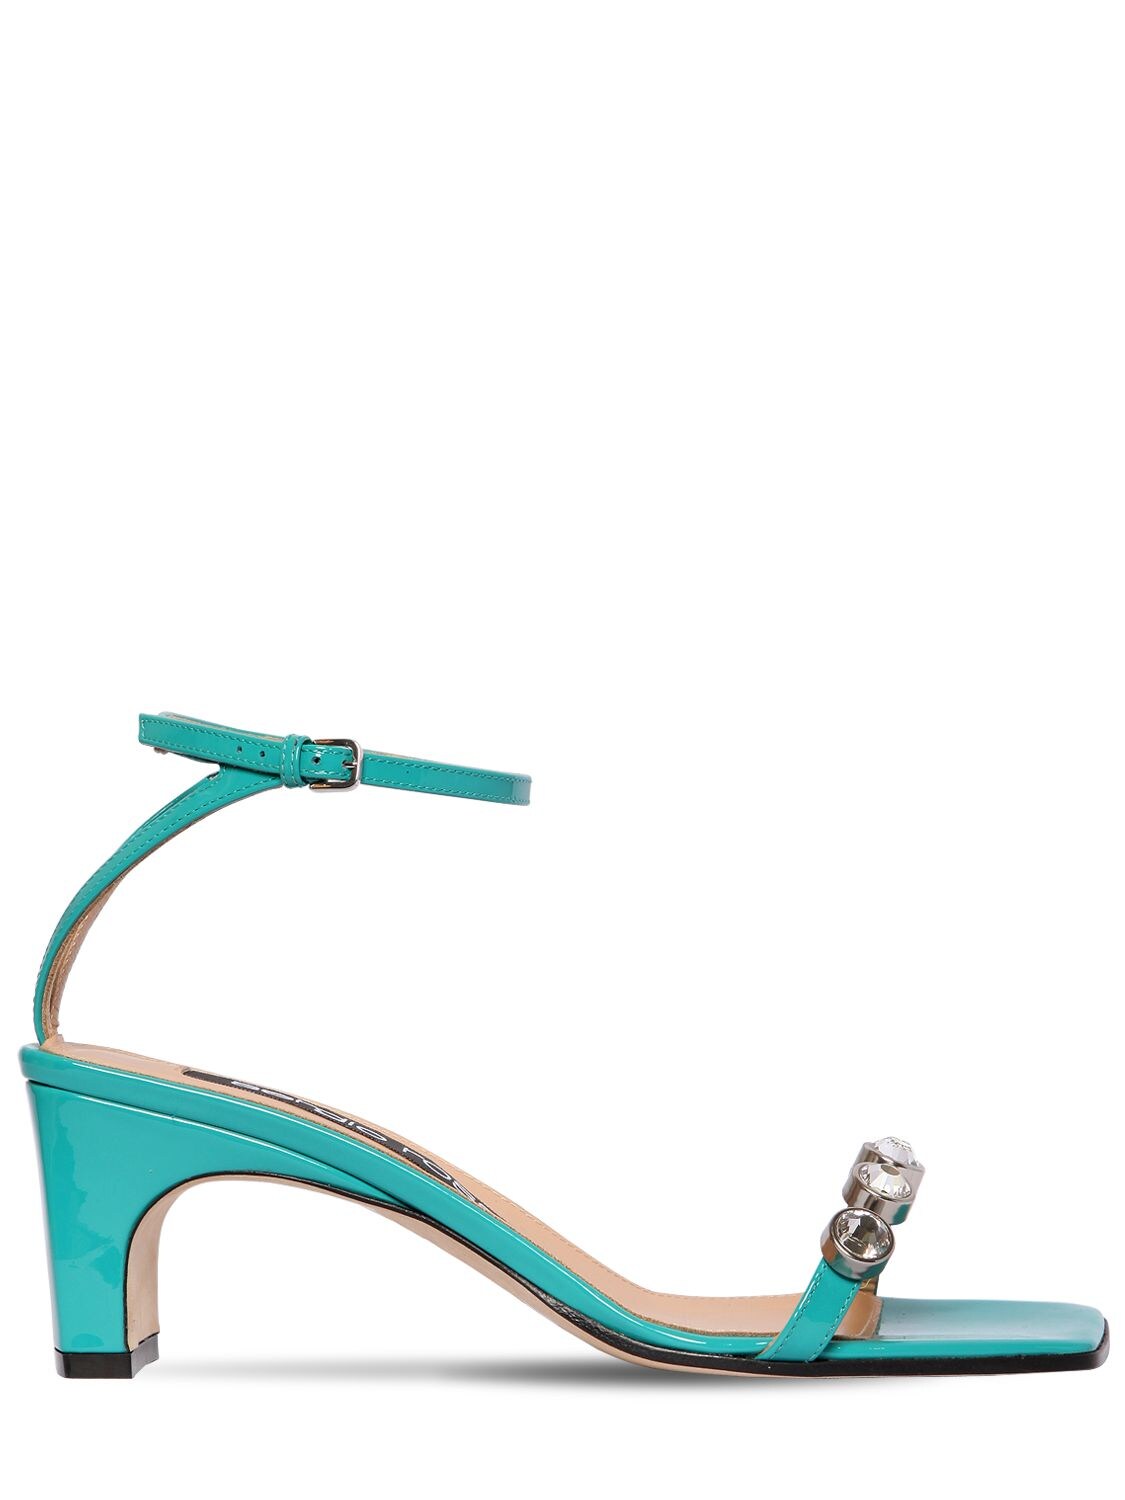 Sergio Rossi 60mm Embellished Patent Leather Sandals In Turquoise